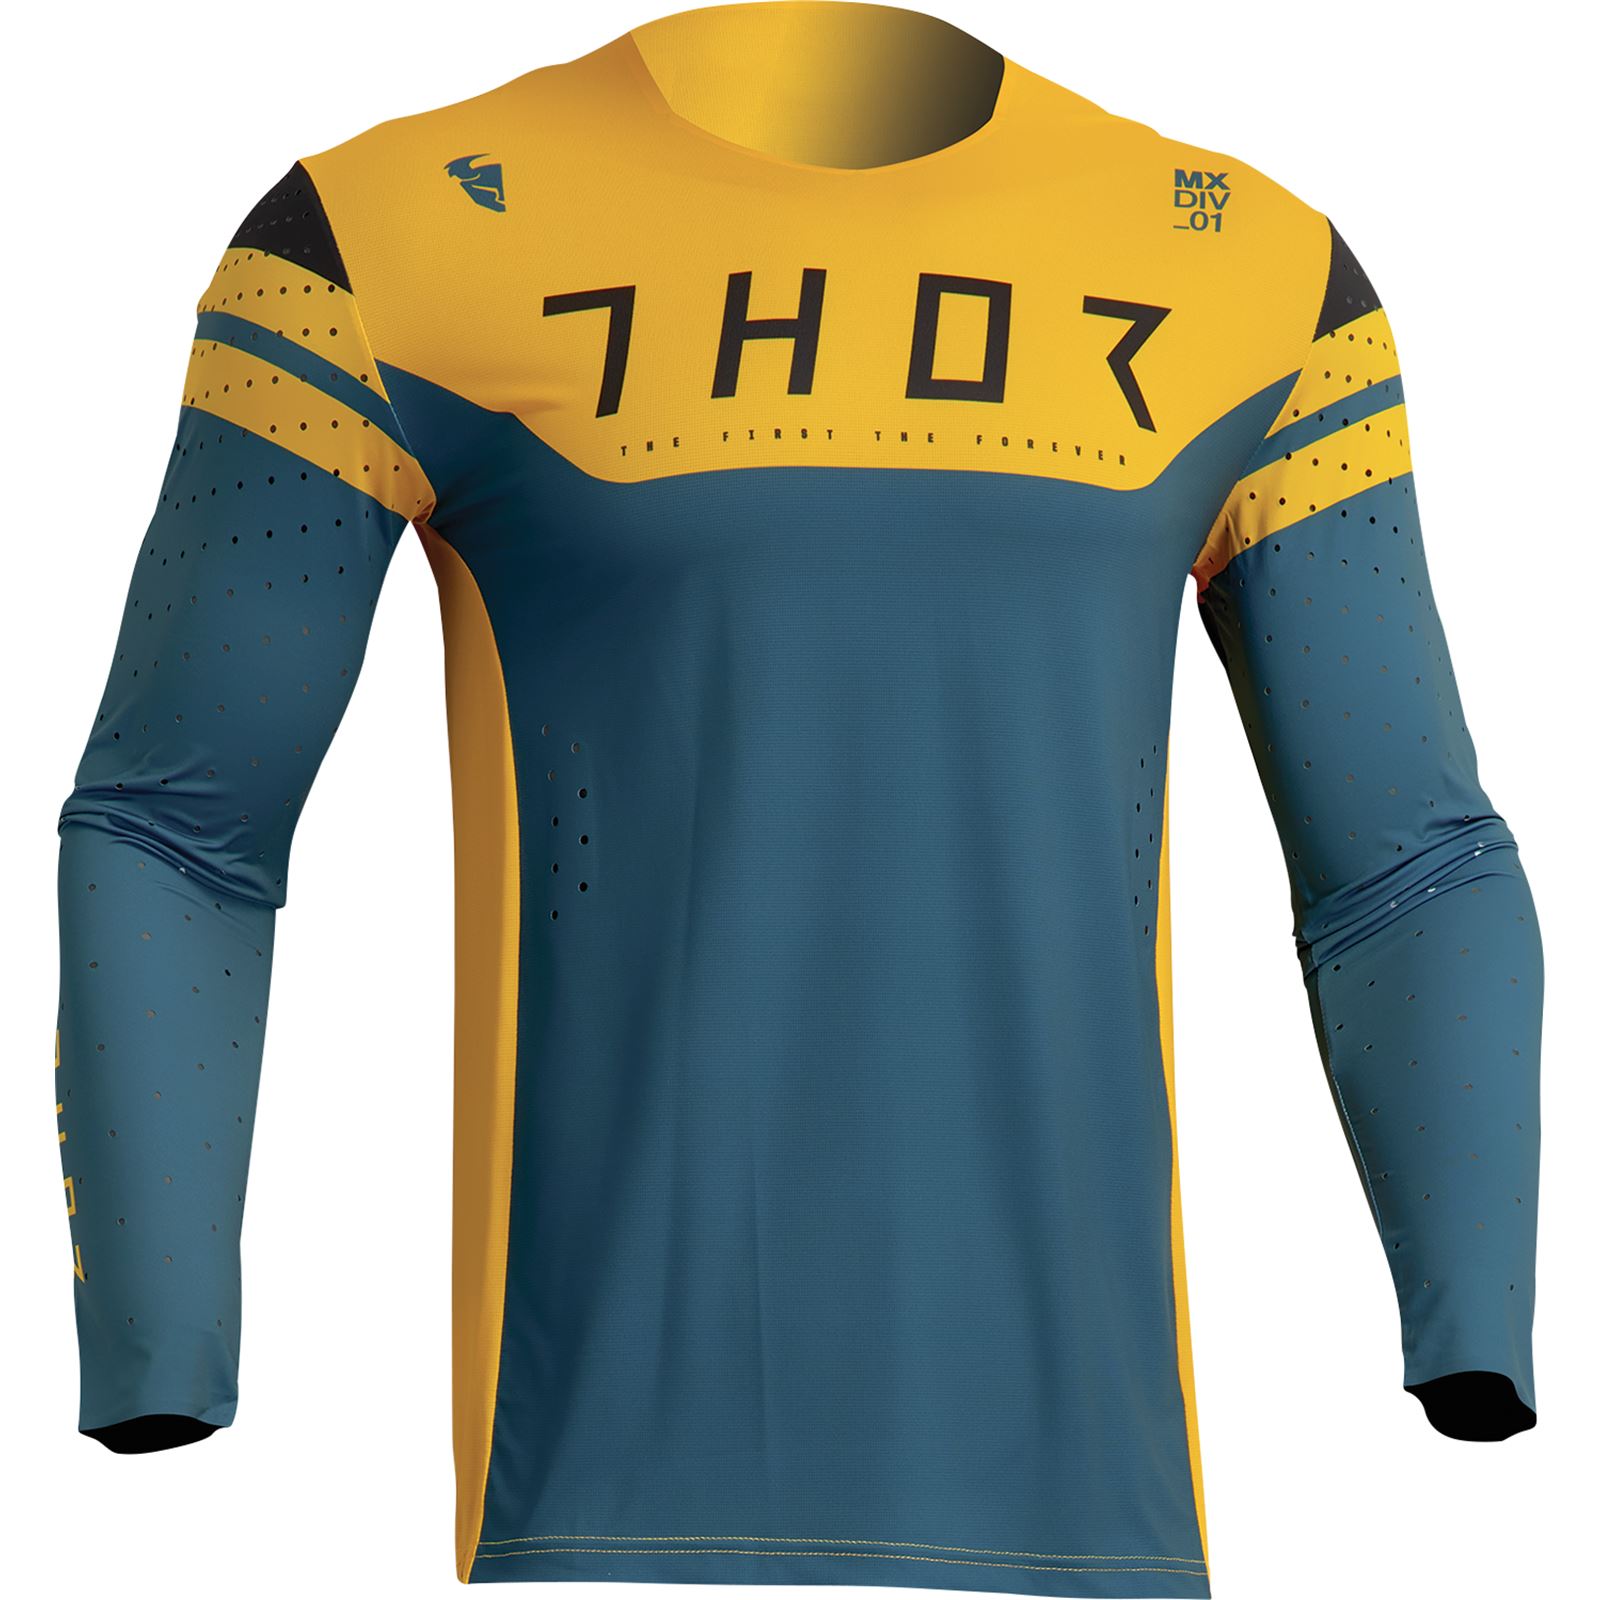 Thor Prime Rival Jersey - Teal/Yellow - 2XL